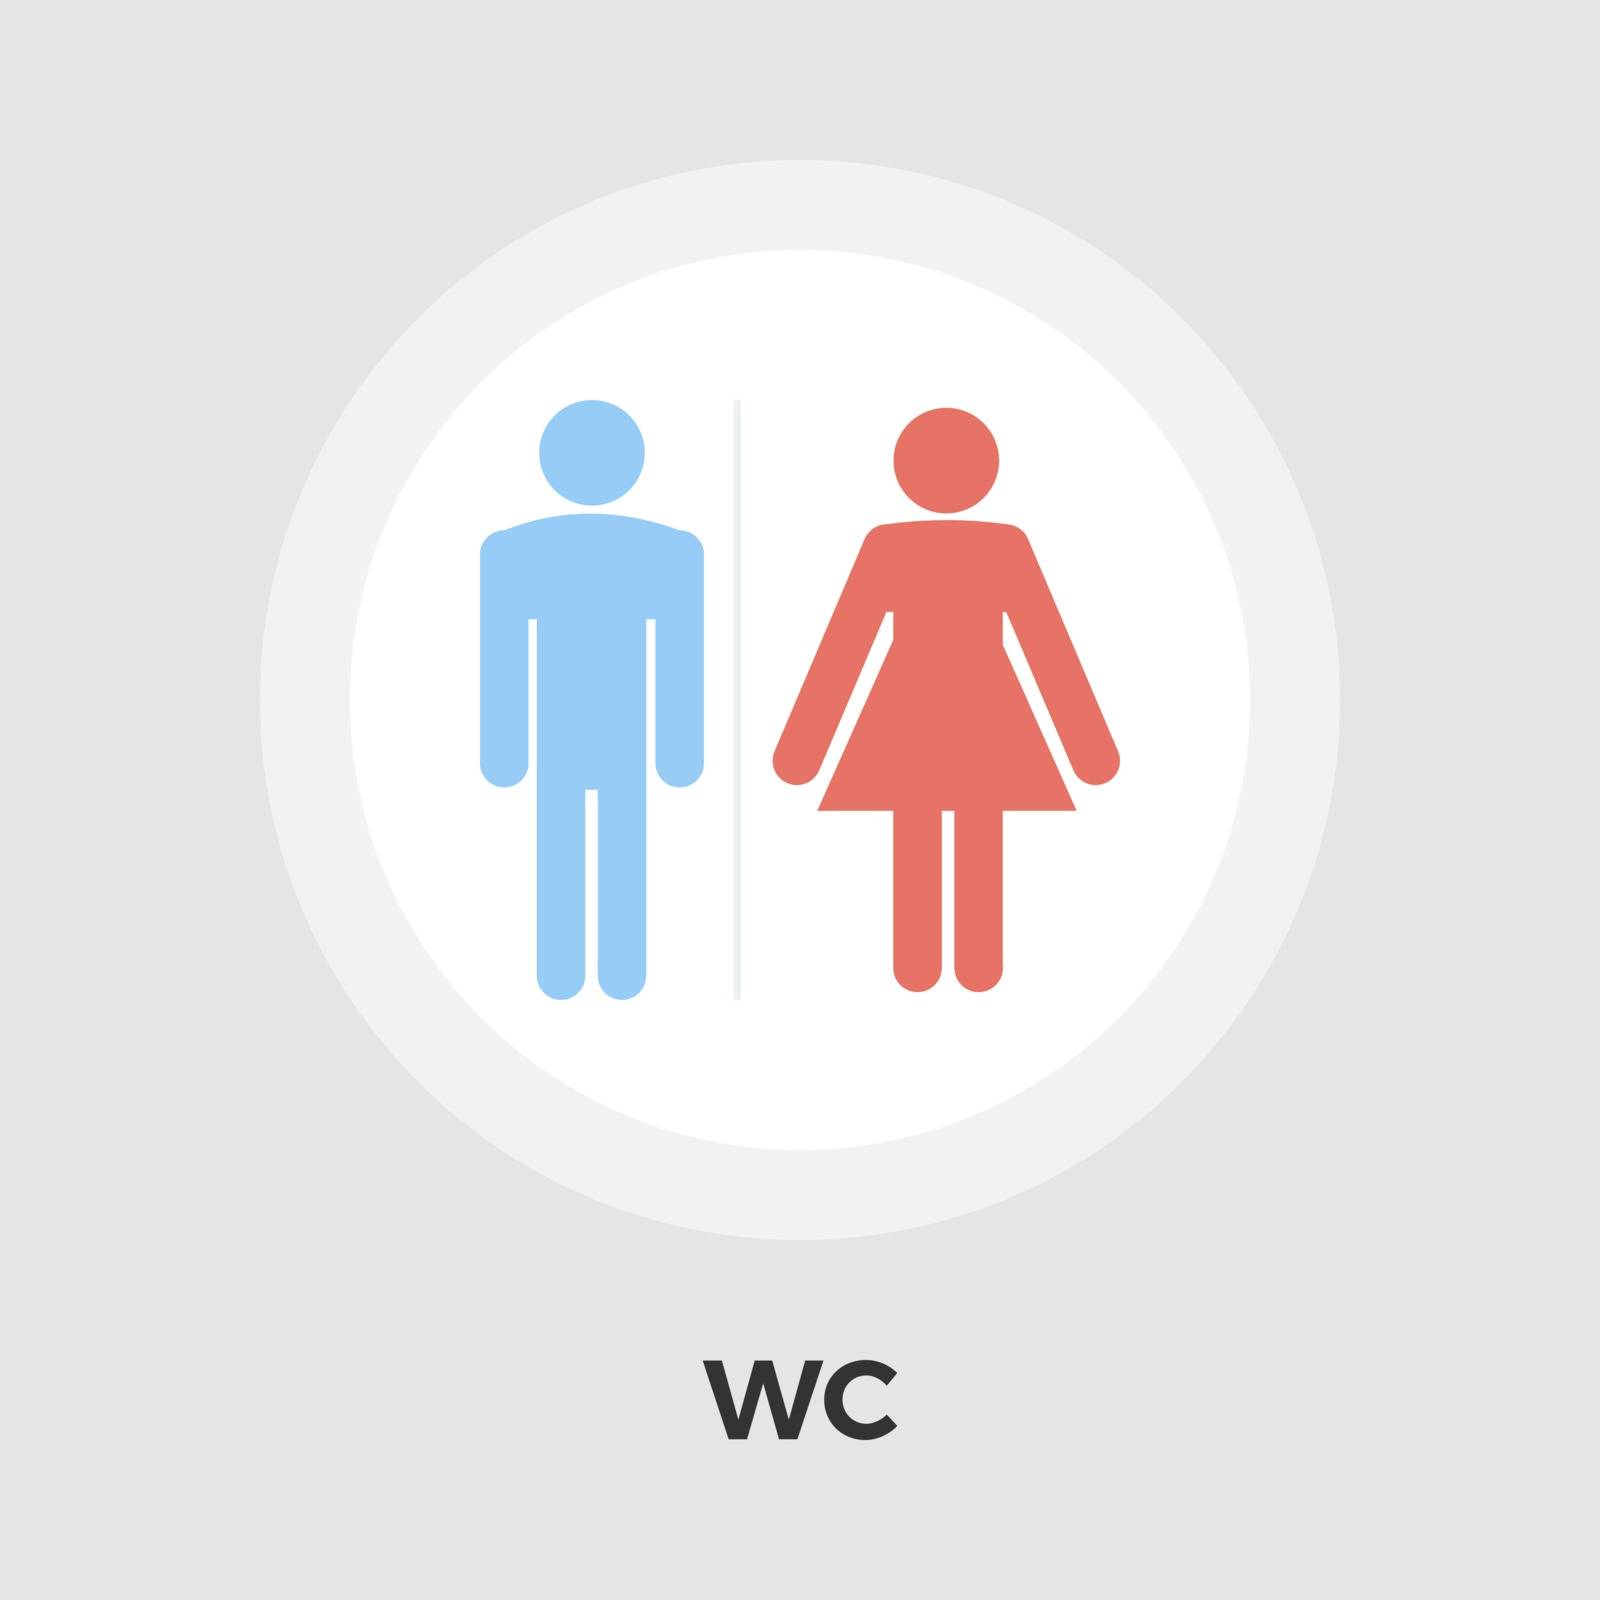 WC icon vector. Flat icon isolated on the white background. Editable EPS file. Vector illustration.